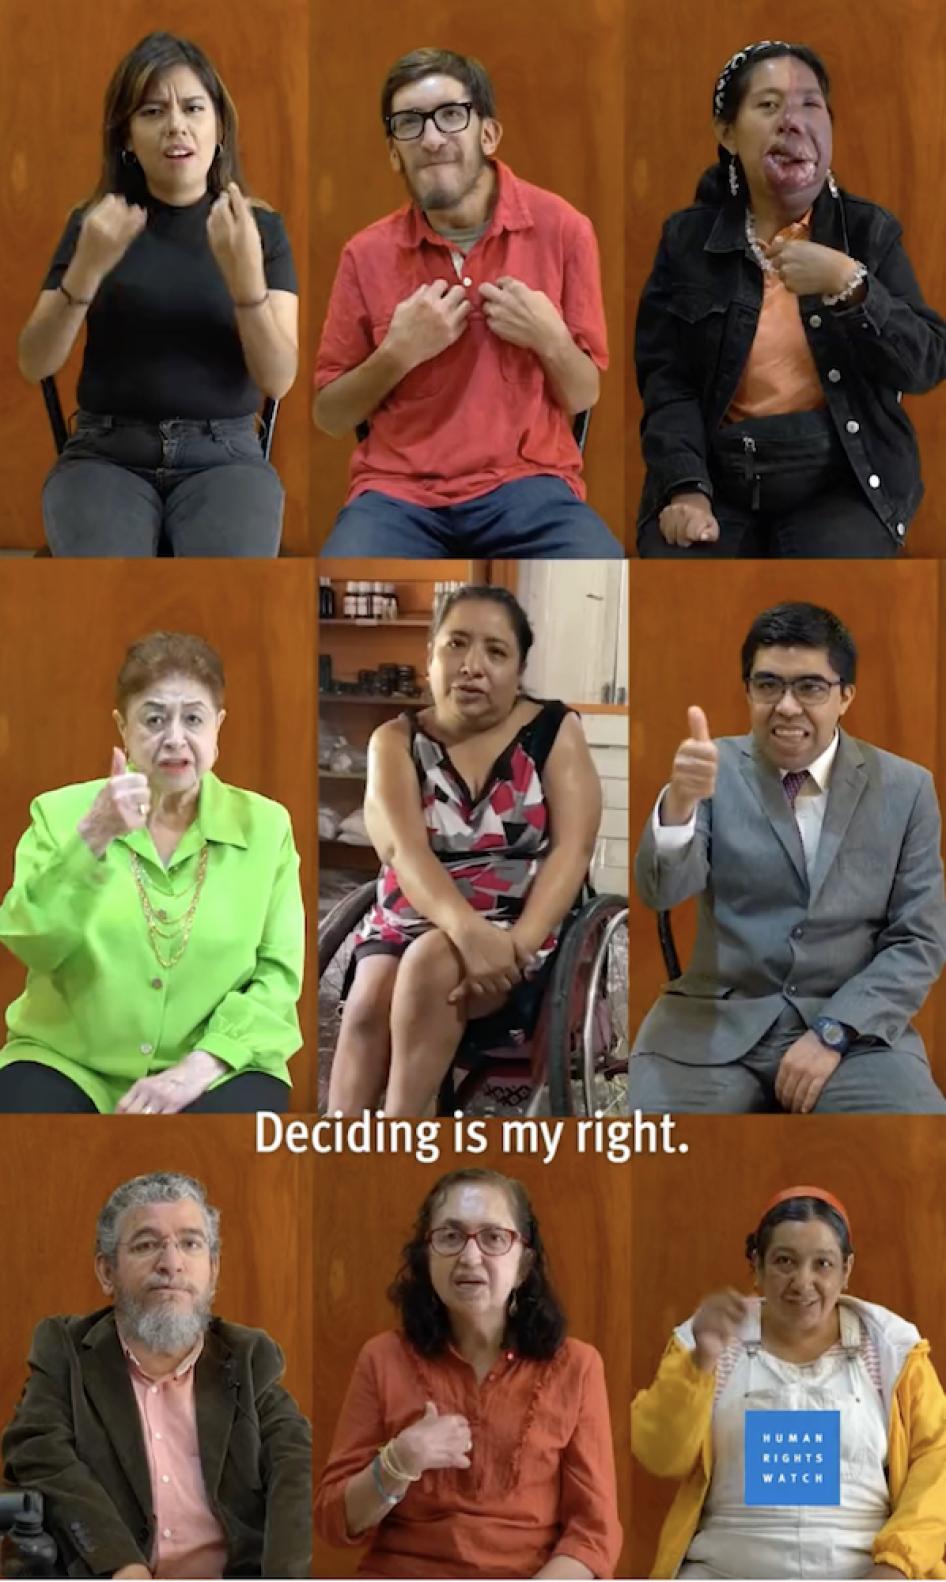 Protect Women with Disabilities from Violence in Mexico